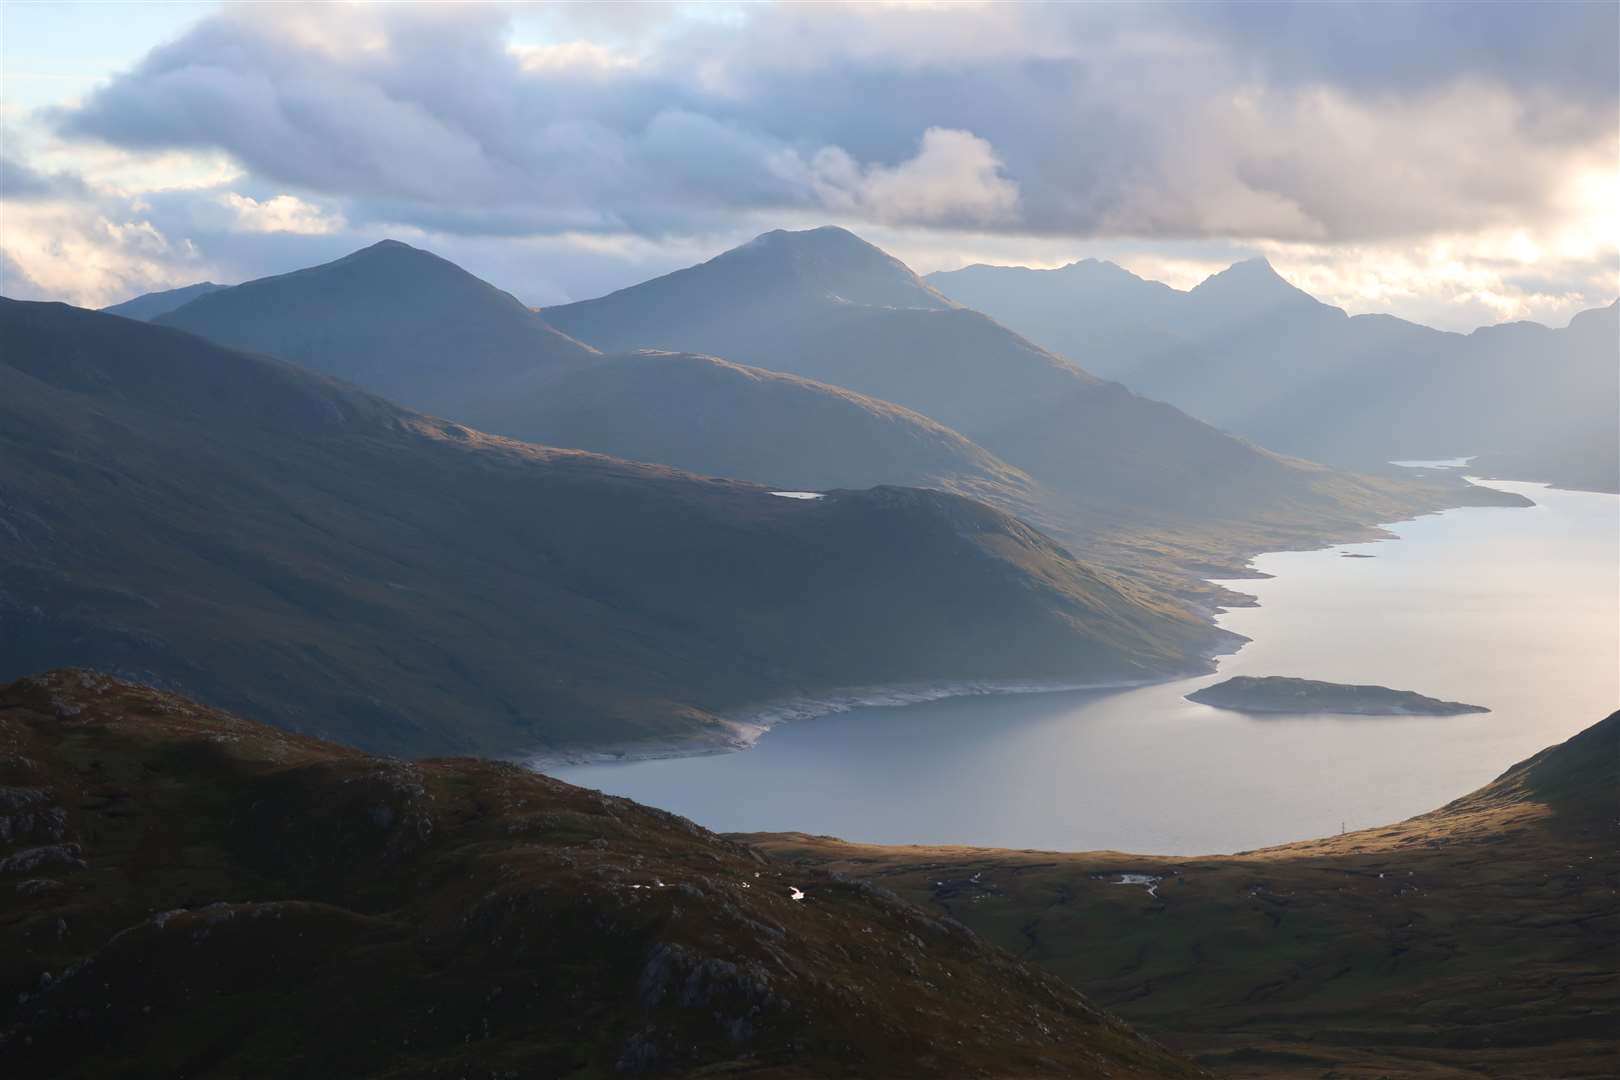 Looking towards Kinloch Hourn over Gairich, Sgurr Mor and Sgurr na Ciche above Loch Cuaich.